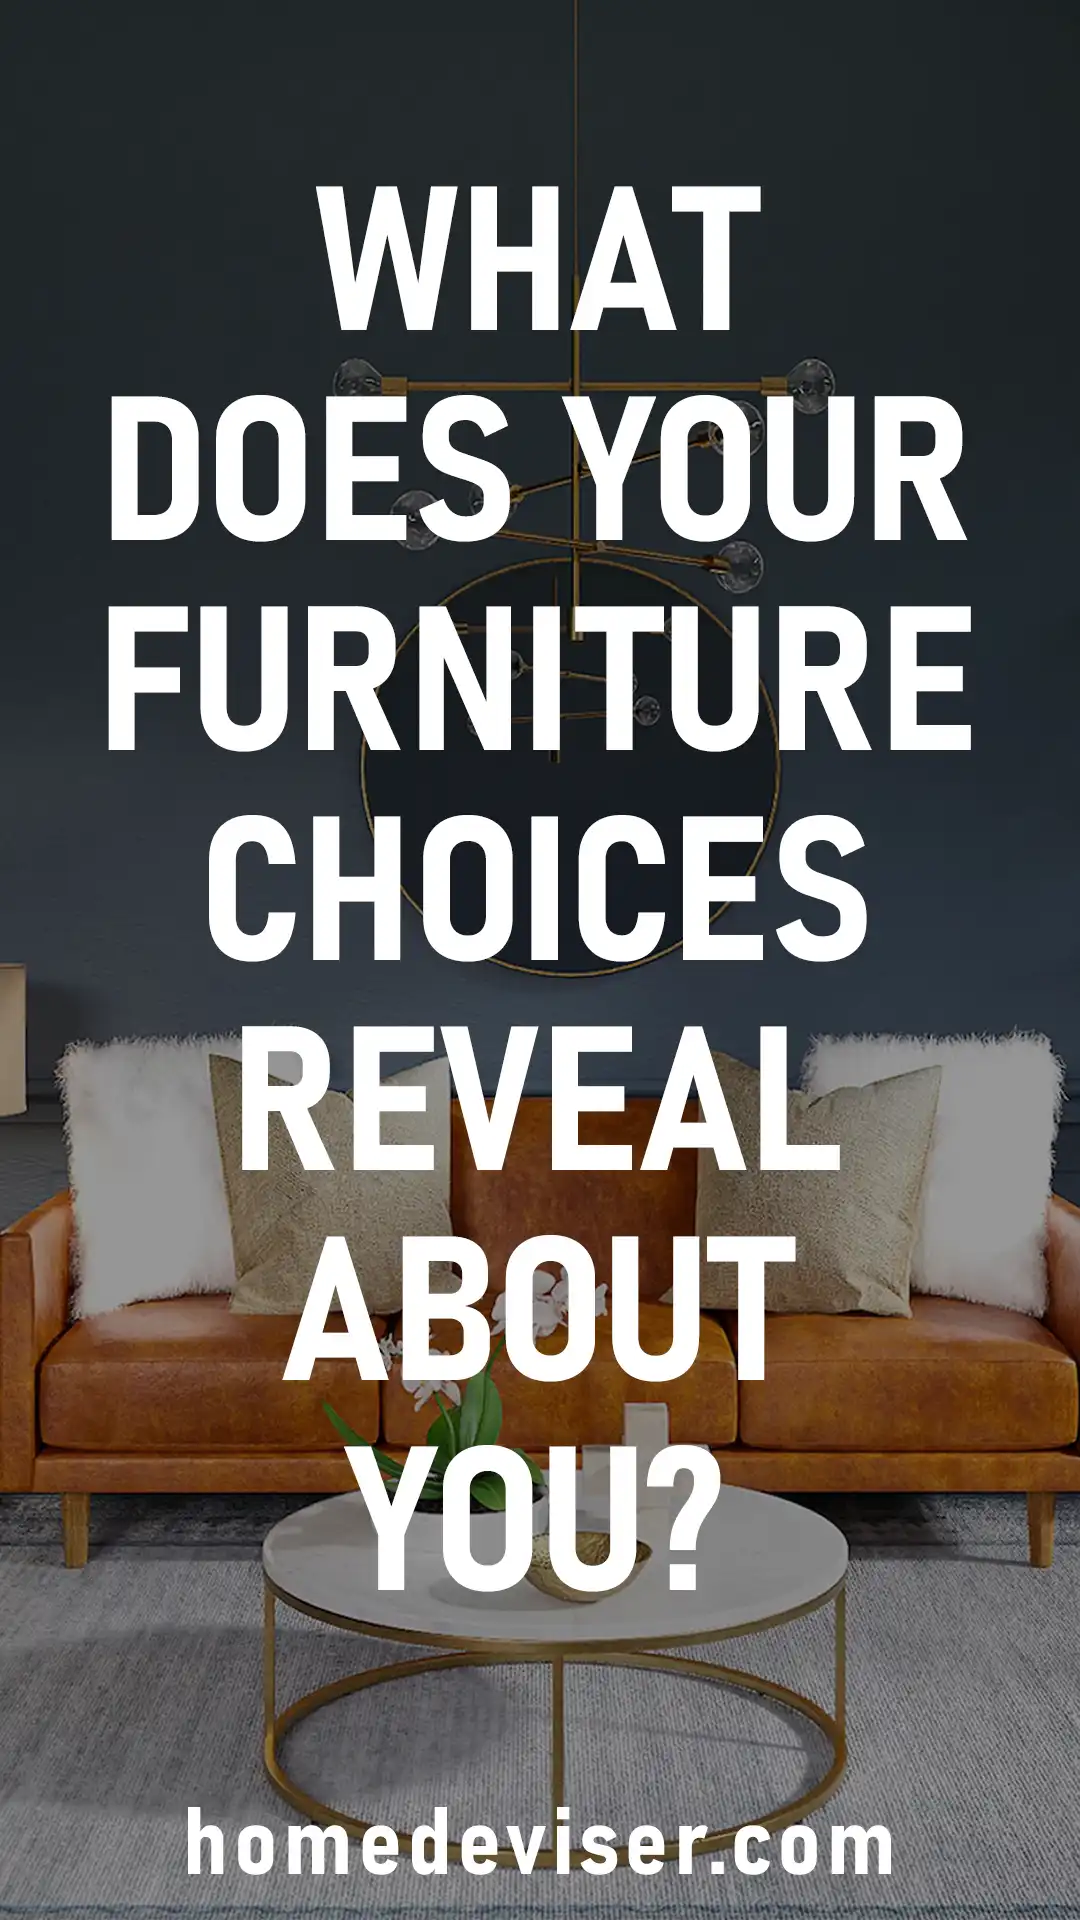 What Does Your Furniture Choices Reveal About You?